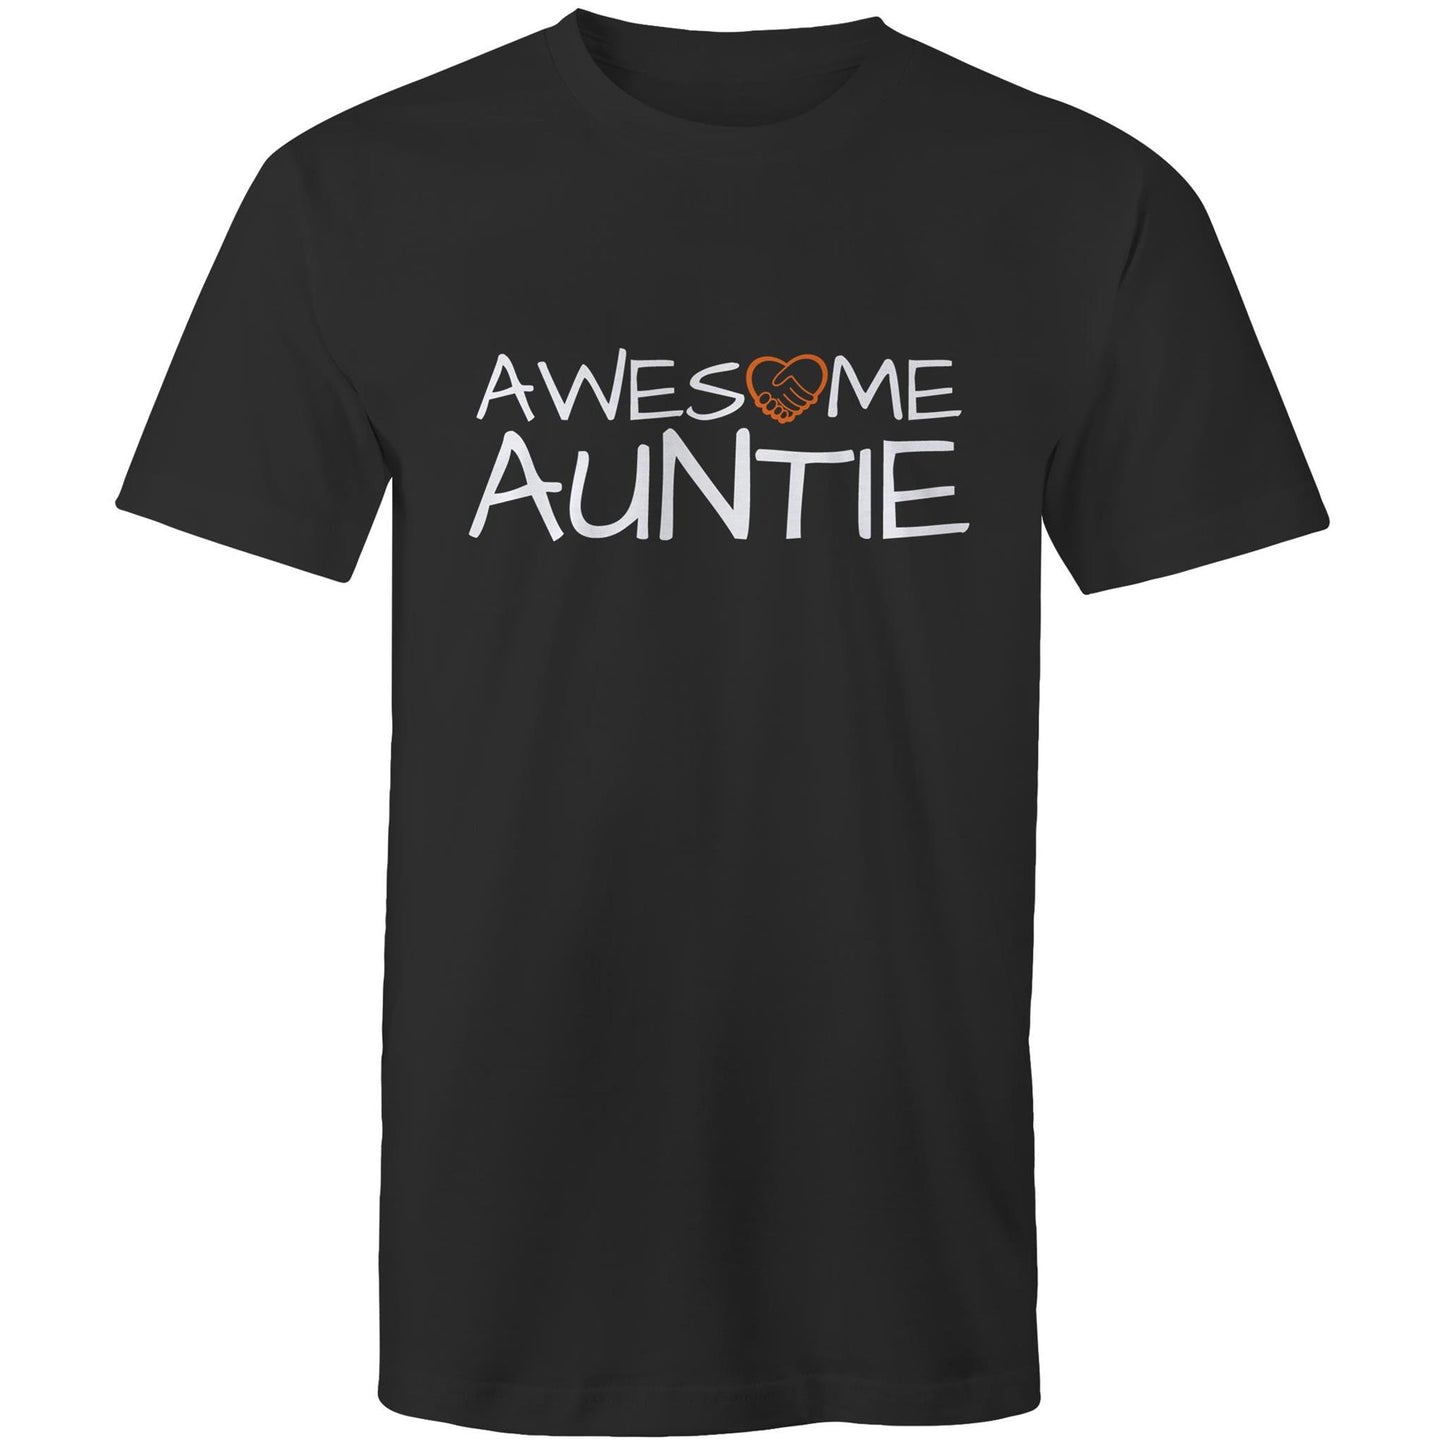 Awesome Auntie T-shirt